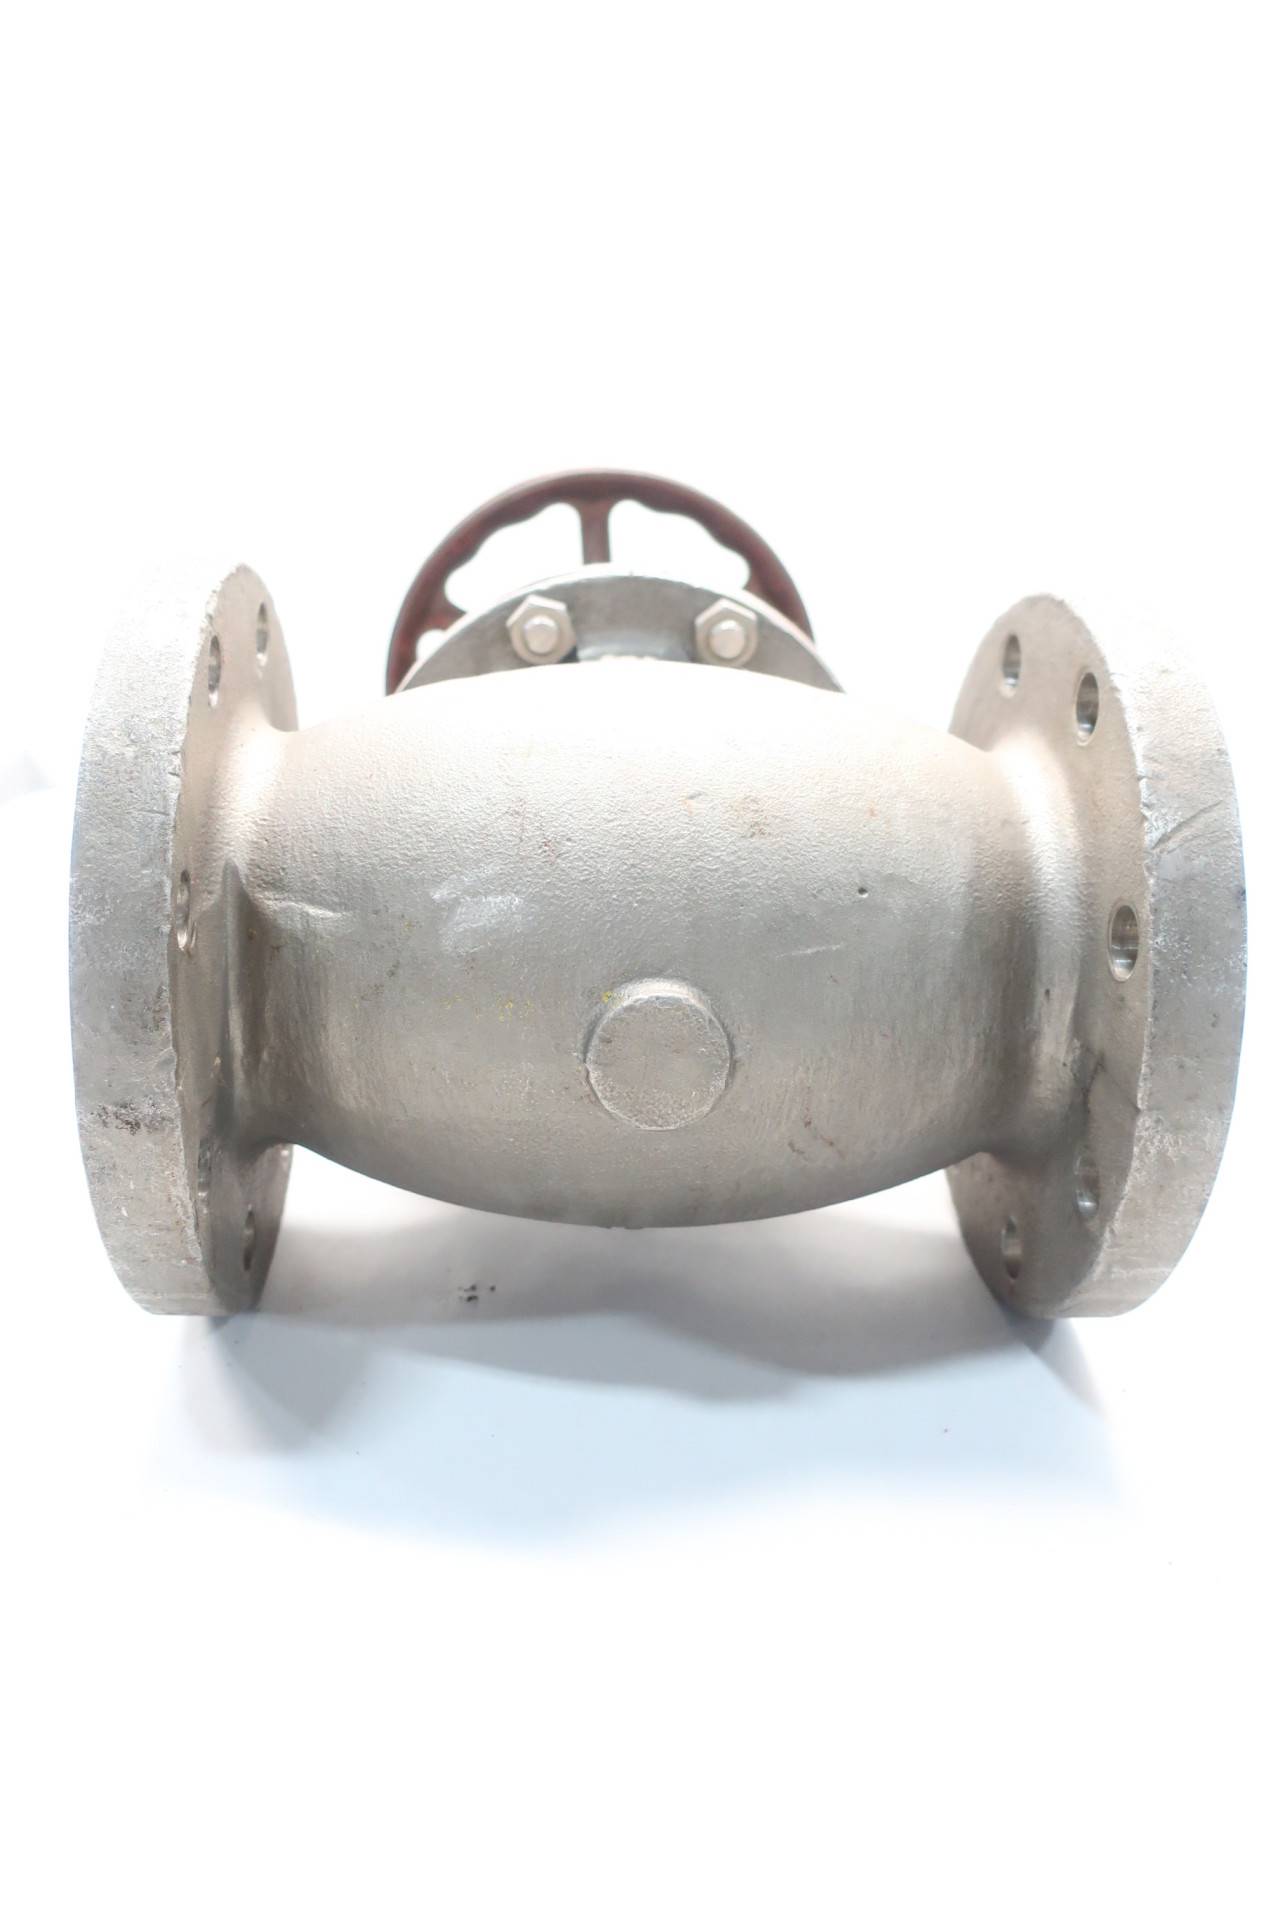 ALOYCO 317 150 Stainless FLANGED 4IN Globe Valve 